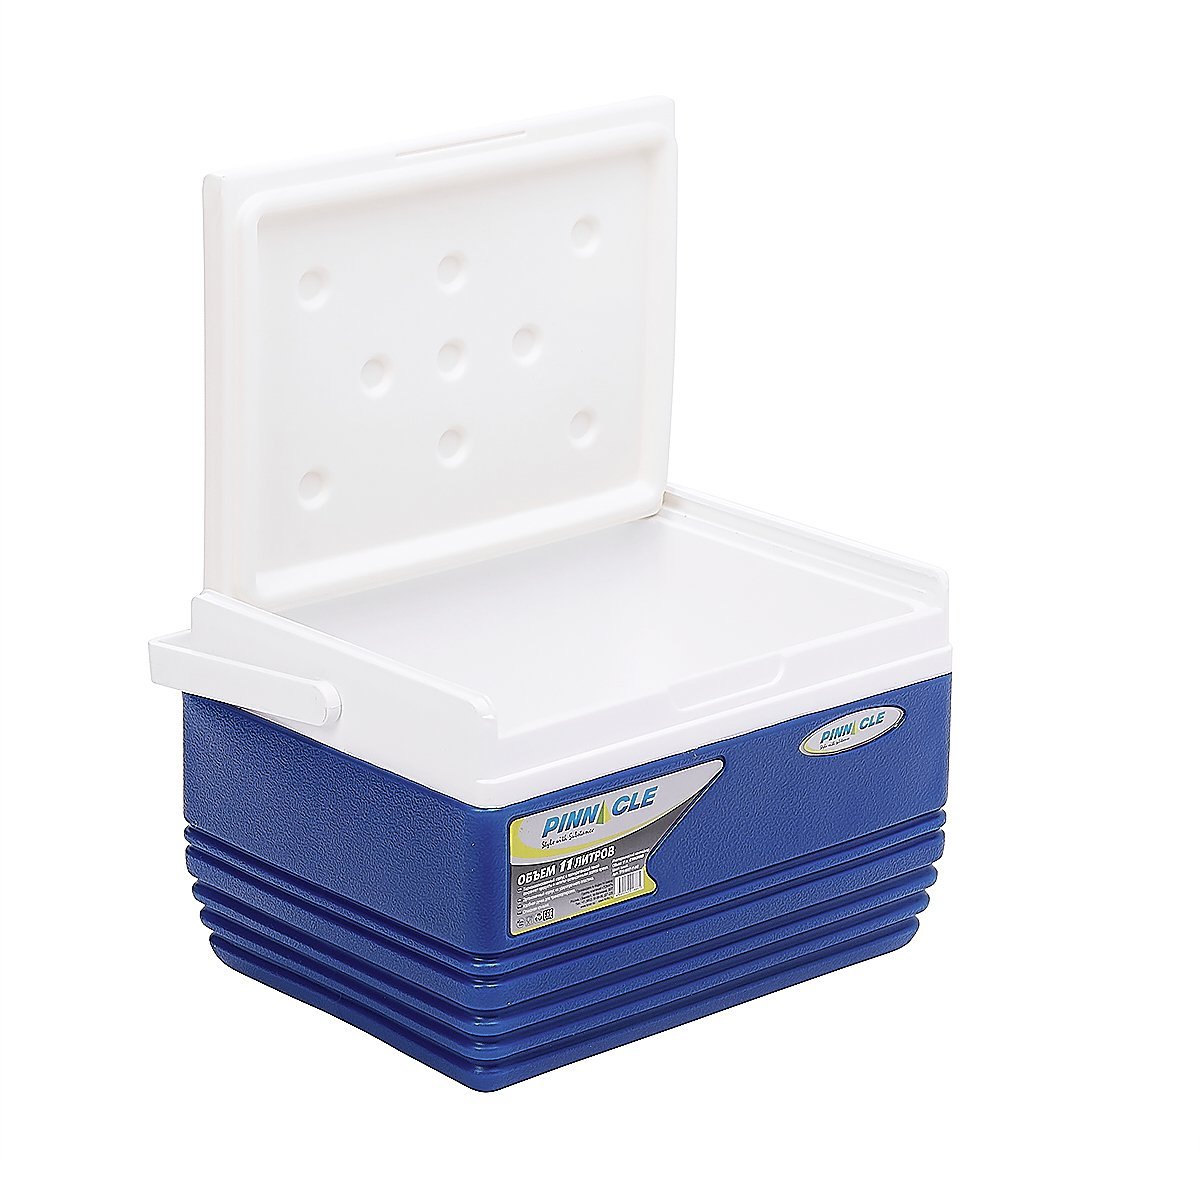 Eskimo Portable Hard-Sided Ice Chest for Camping, 11 qt, Navy Blue with a lid widely open